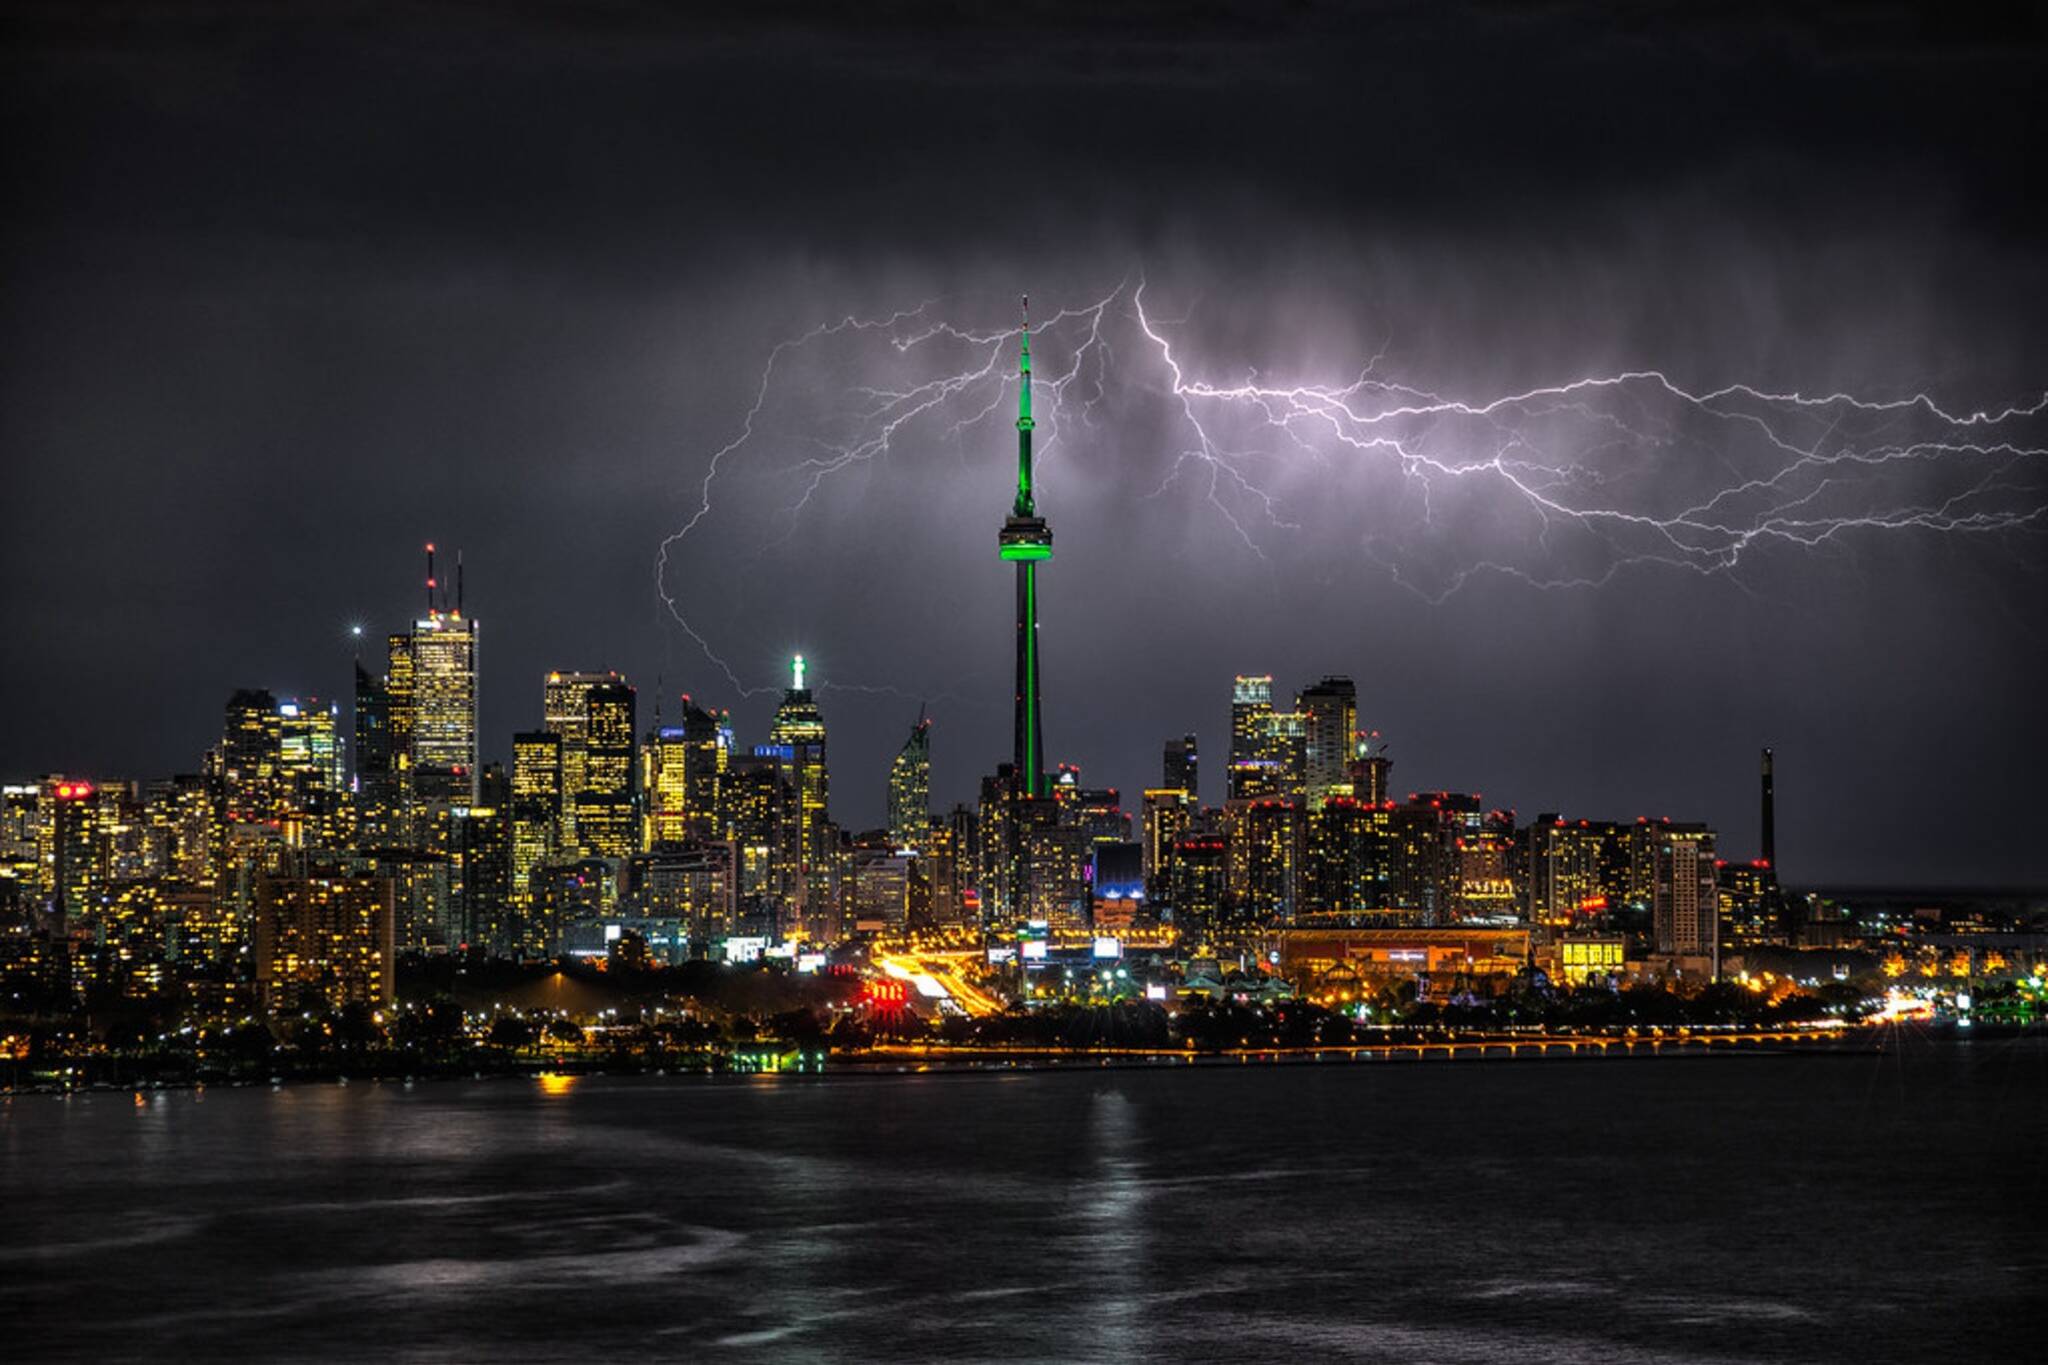 Environment Canada warns of severe thunderstorms and large hail for